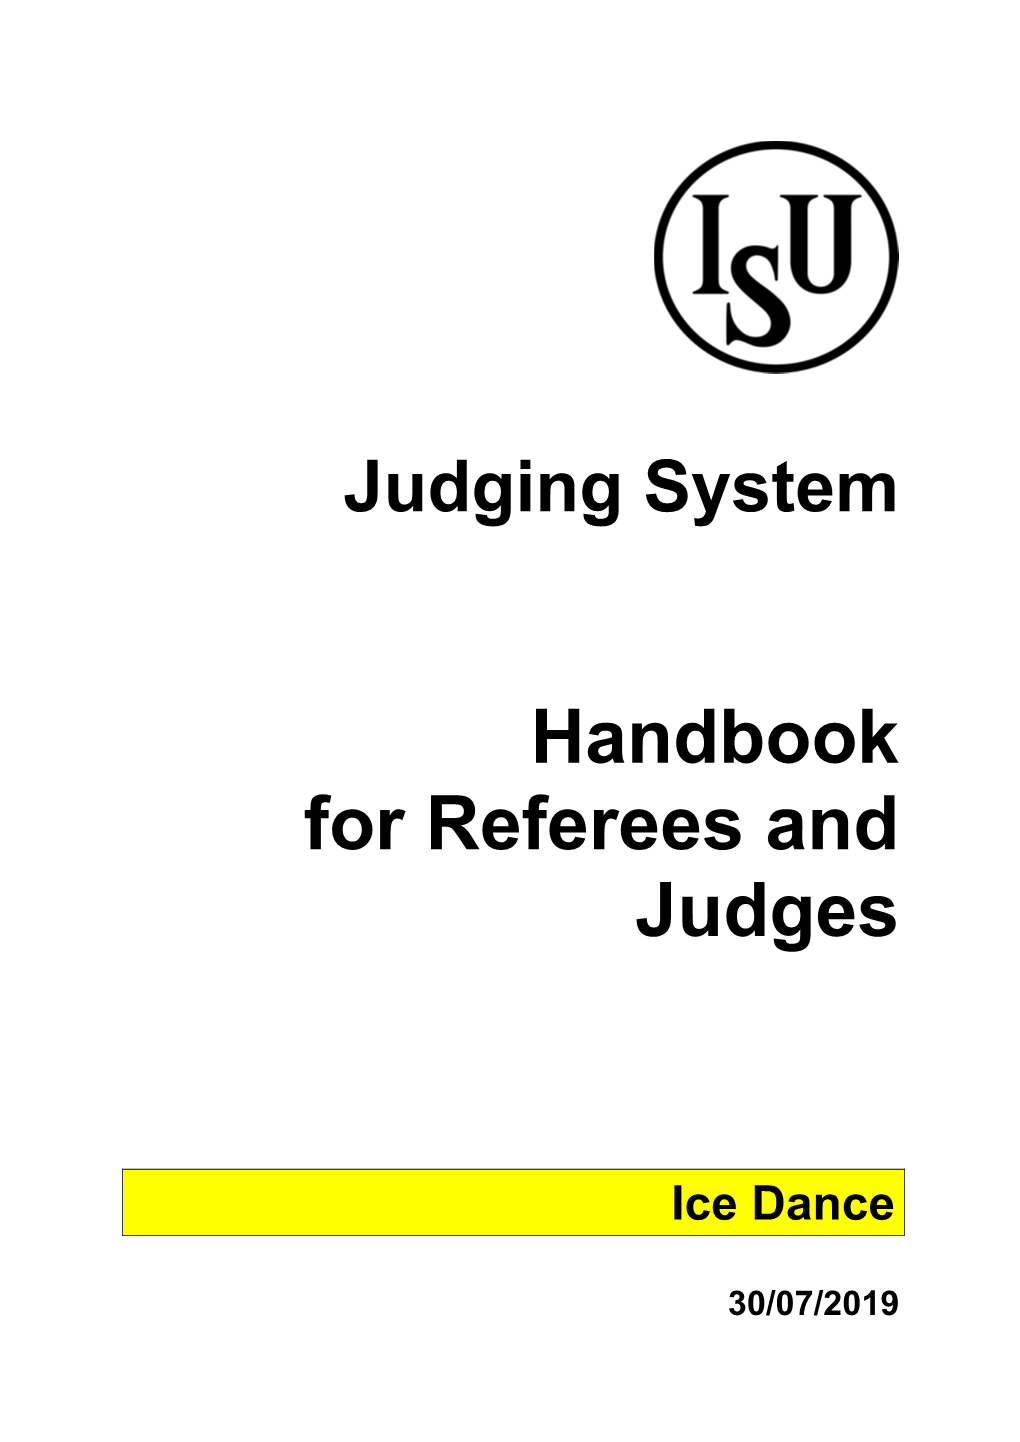 Handbook for Referees and Judges